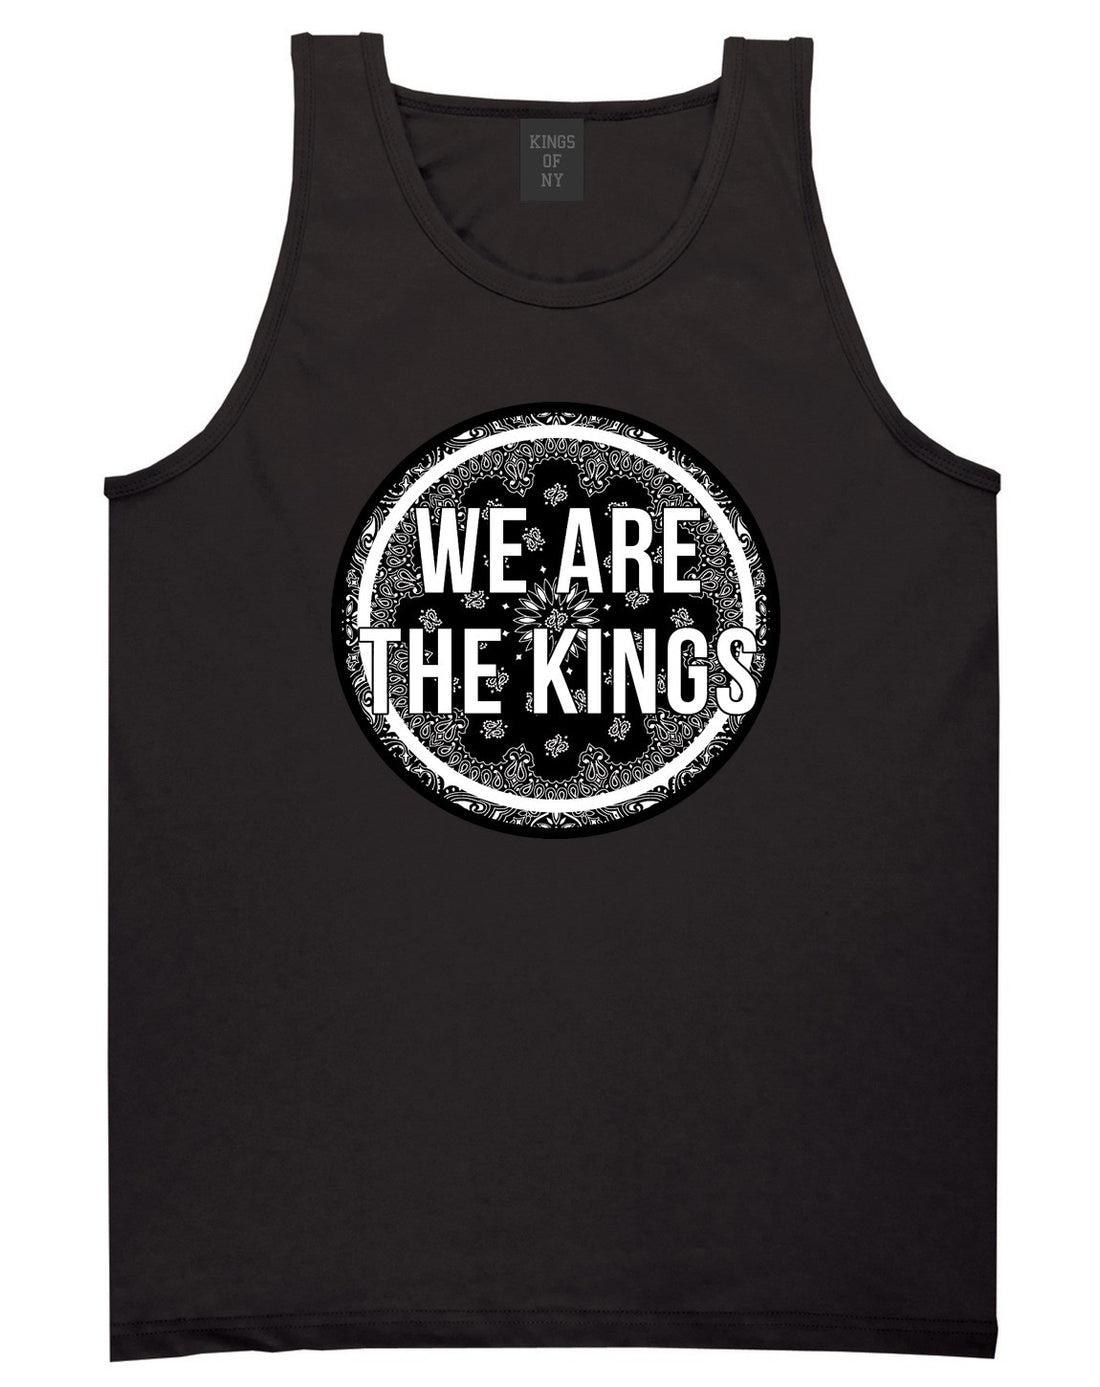 Kings Of NY We Are The Kings Tank Top in Black